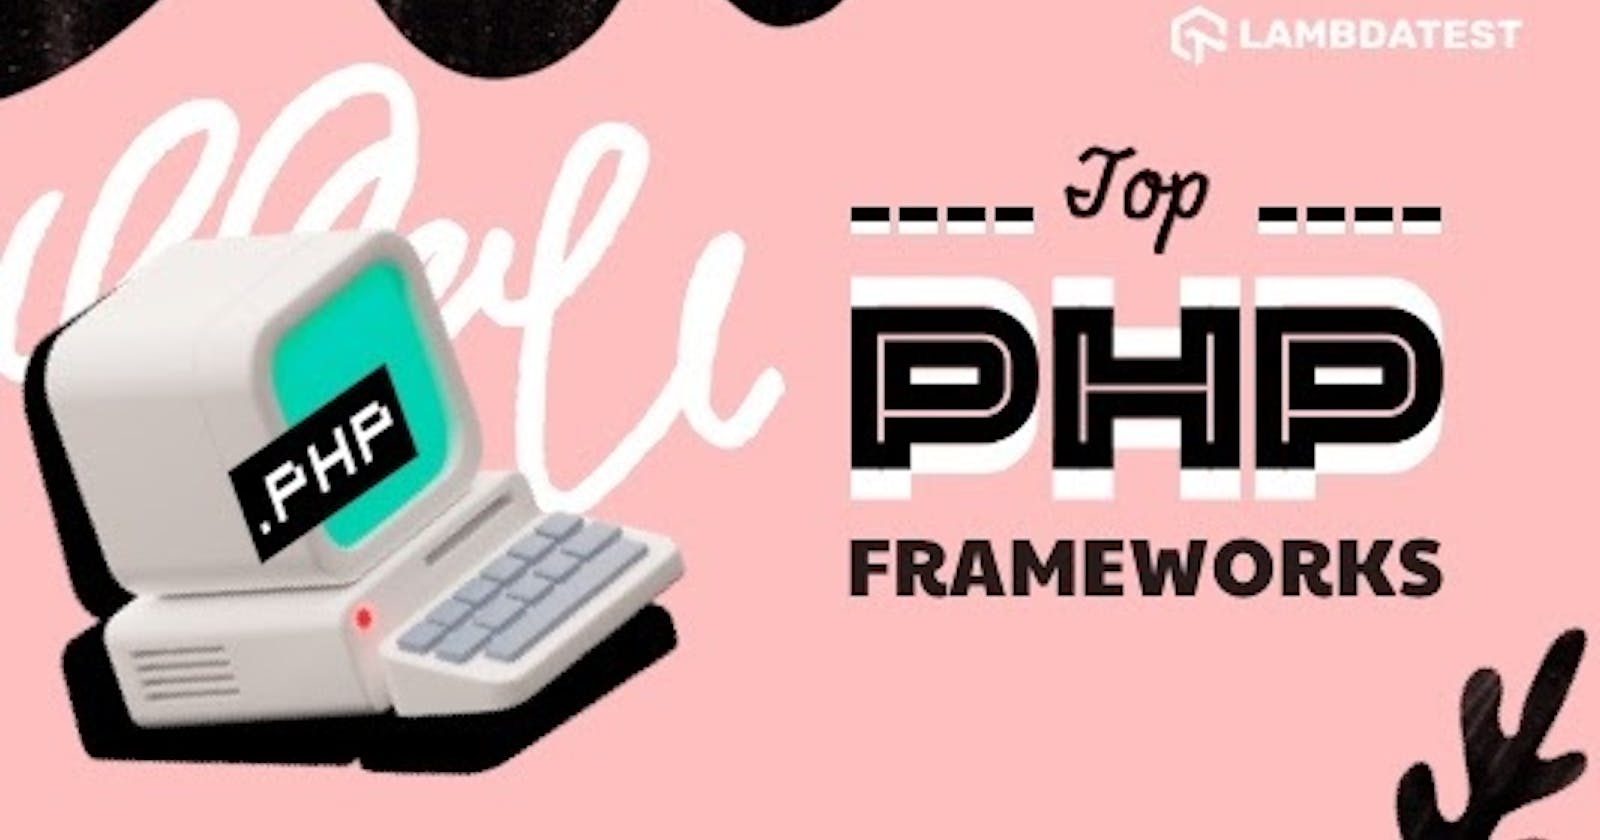 Top 9 PHP Frameworks For Web Development In 2021